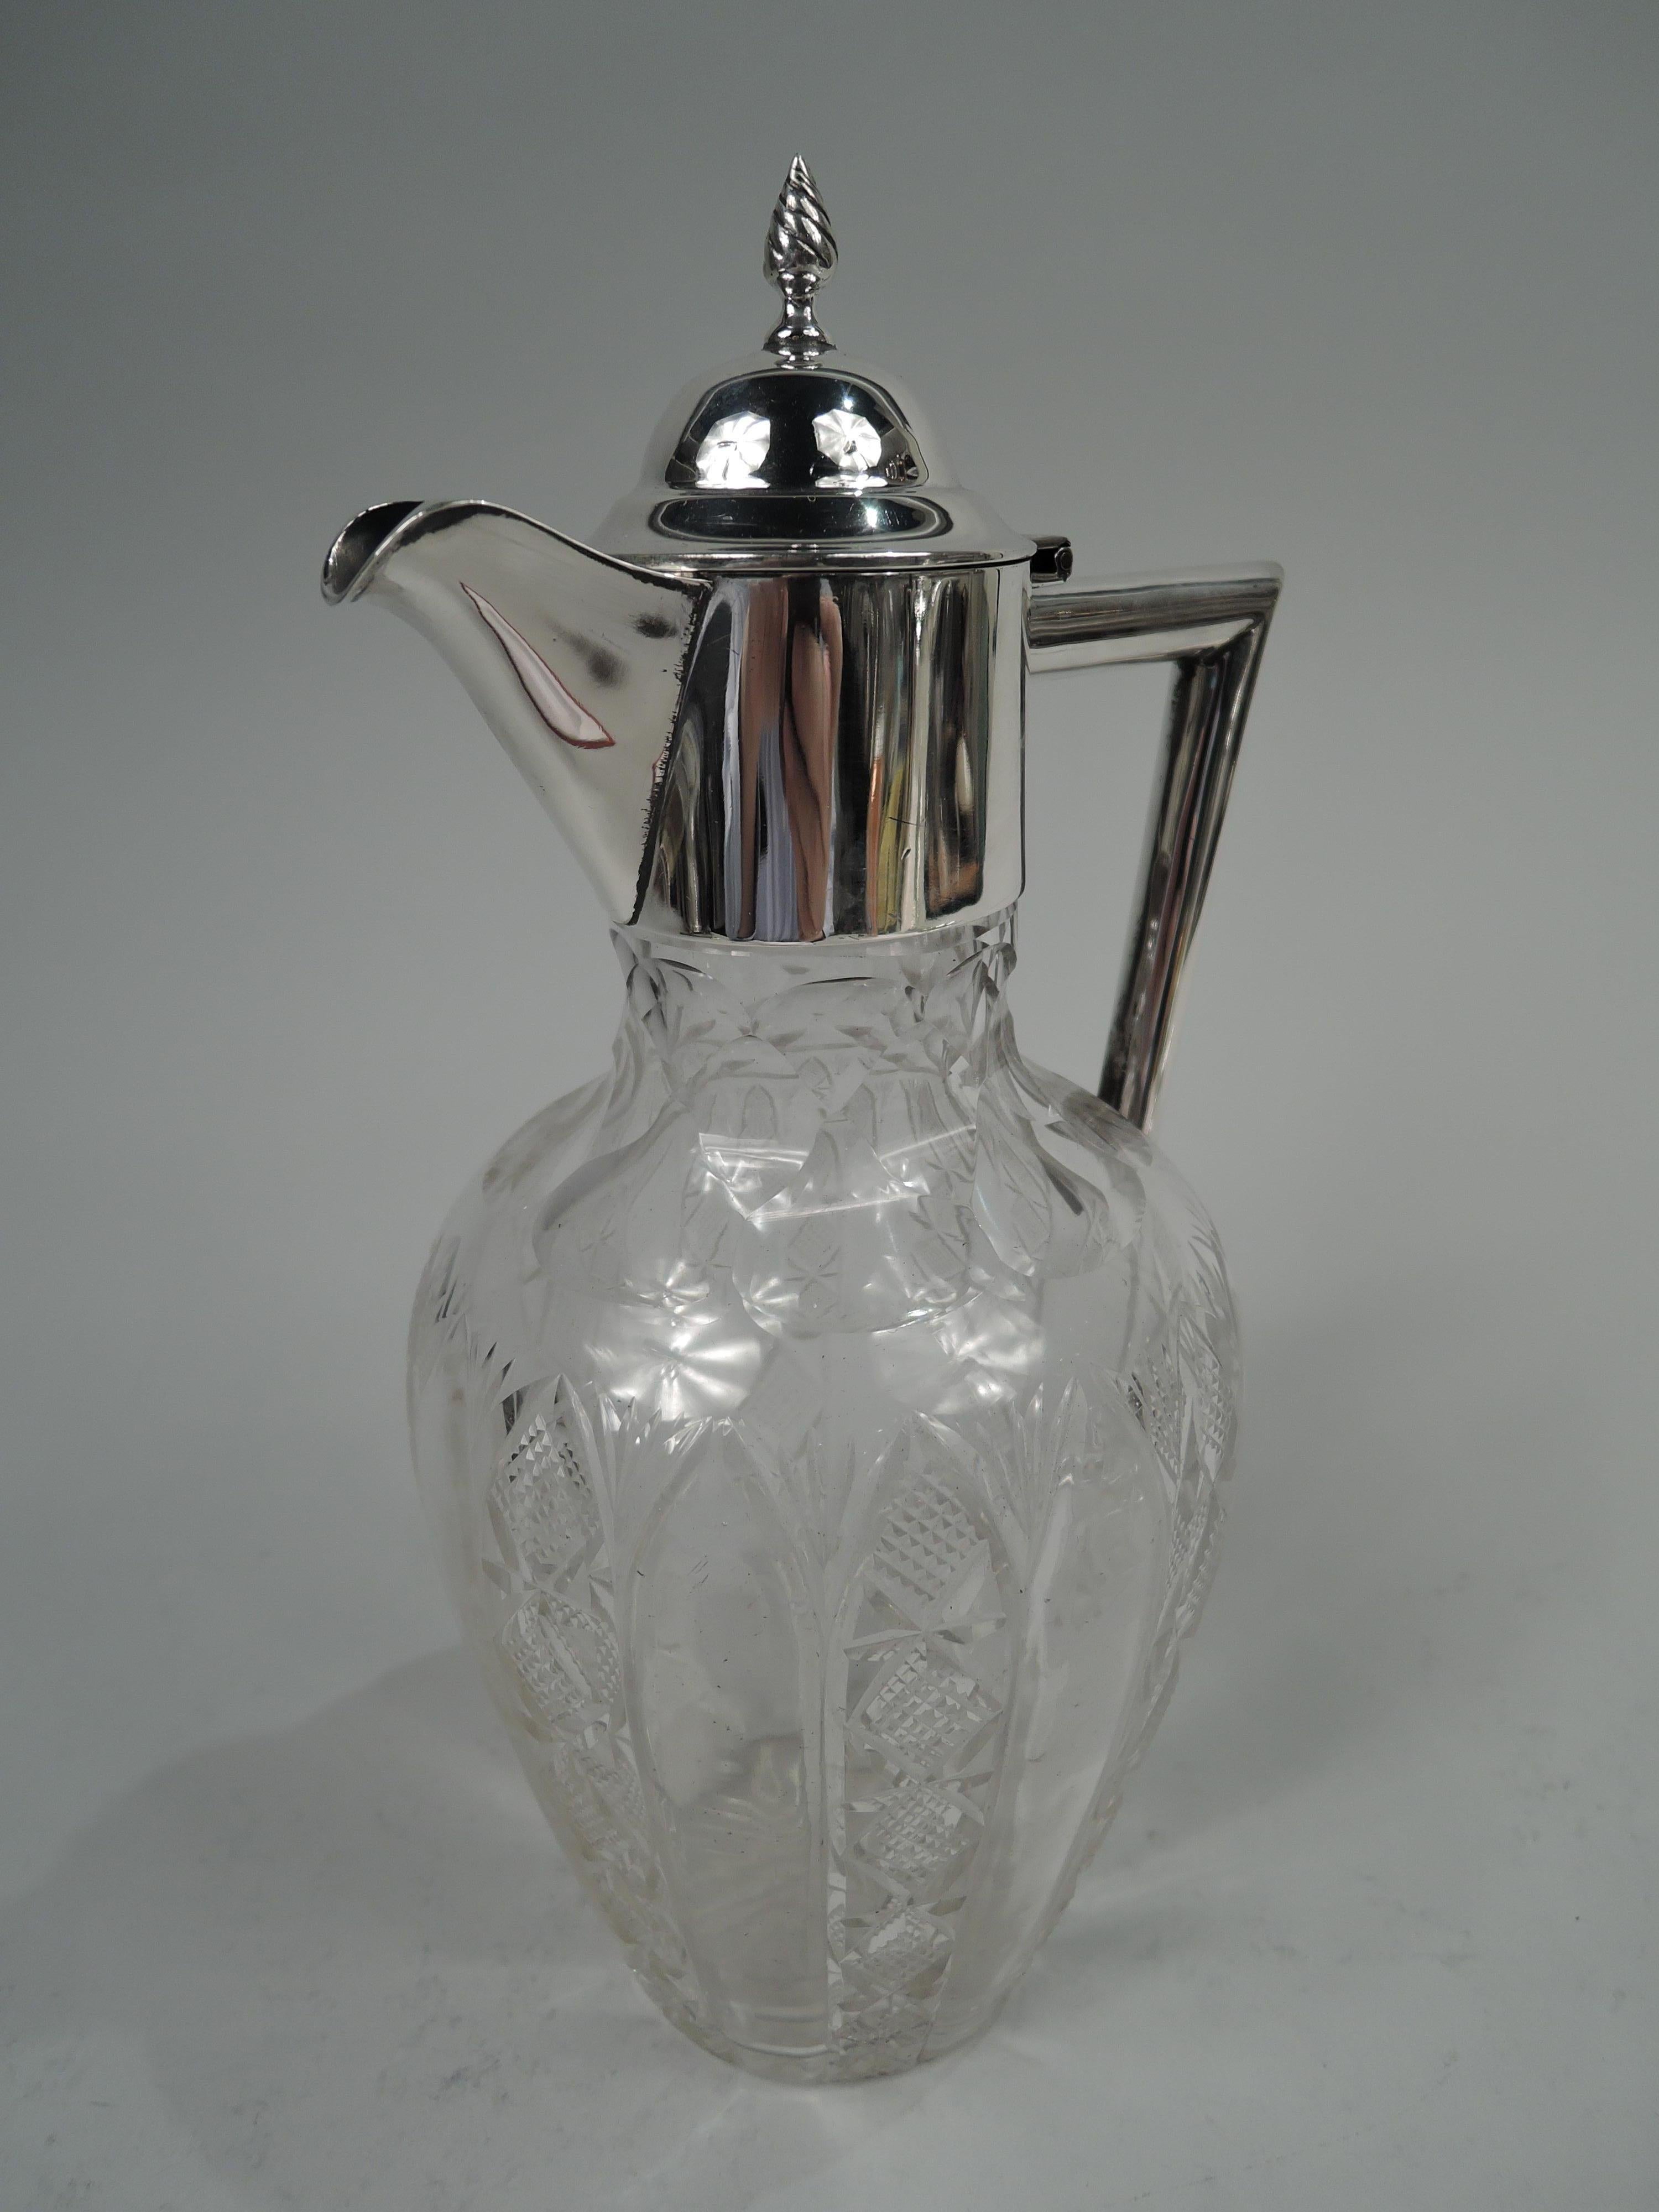 Edwardian sterling silver and cut-glass decanter. Made by William Aitken in Birmingham in 1902. Ovoid glass bowl. On sides plain flutes alternating with diaper flutes; shoulder has shaped facets. Straight neck with sterling silver collar and hinged